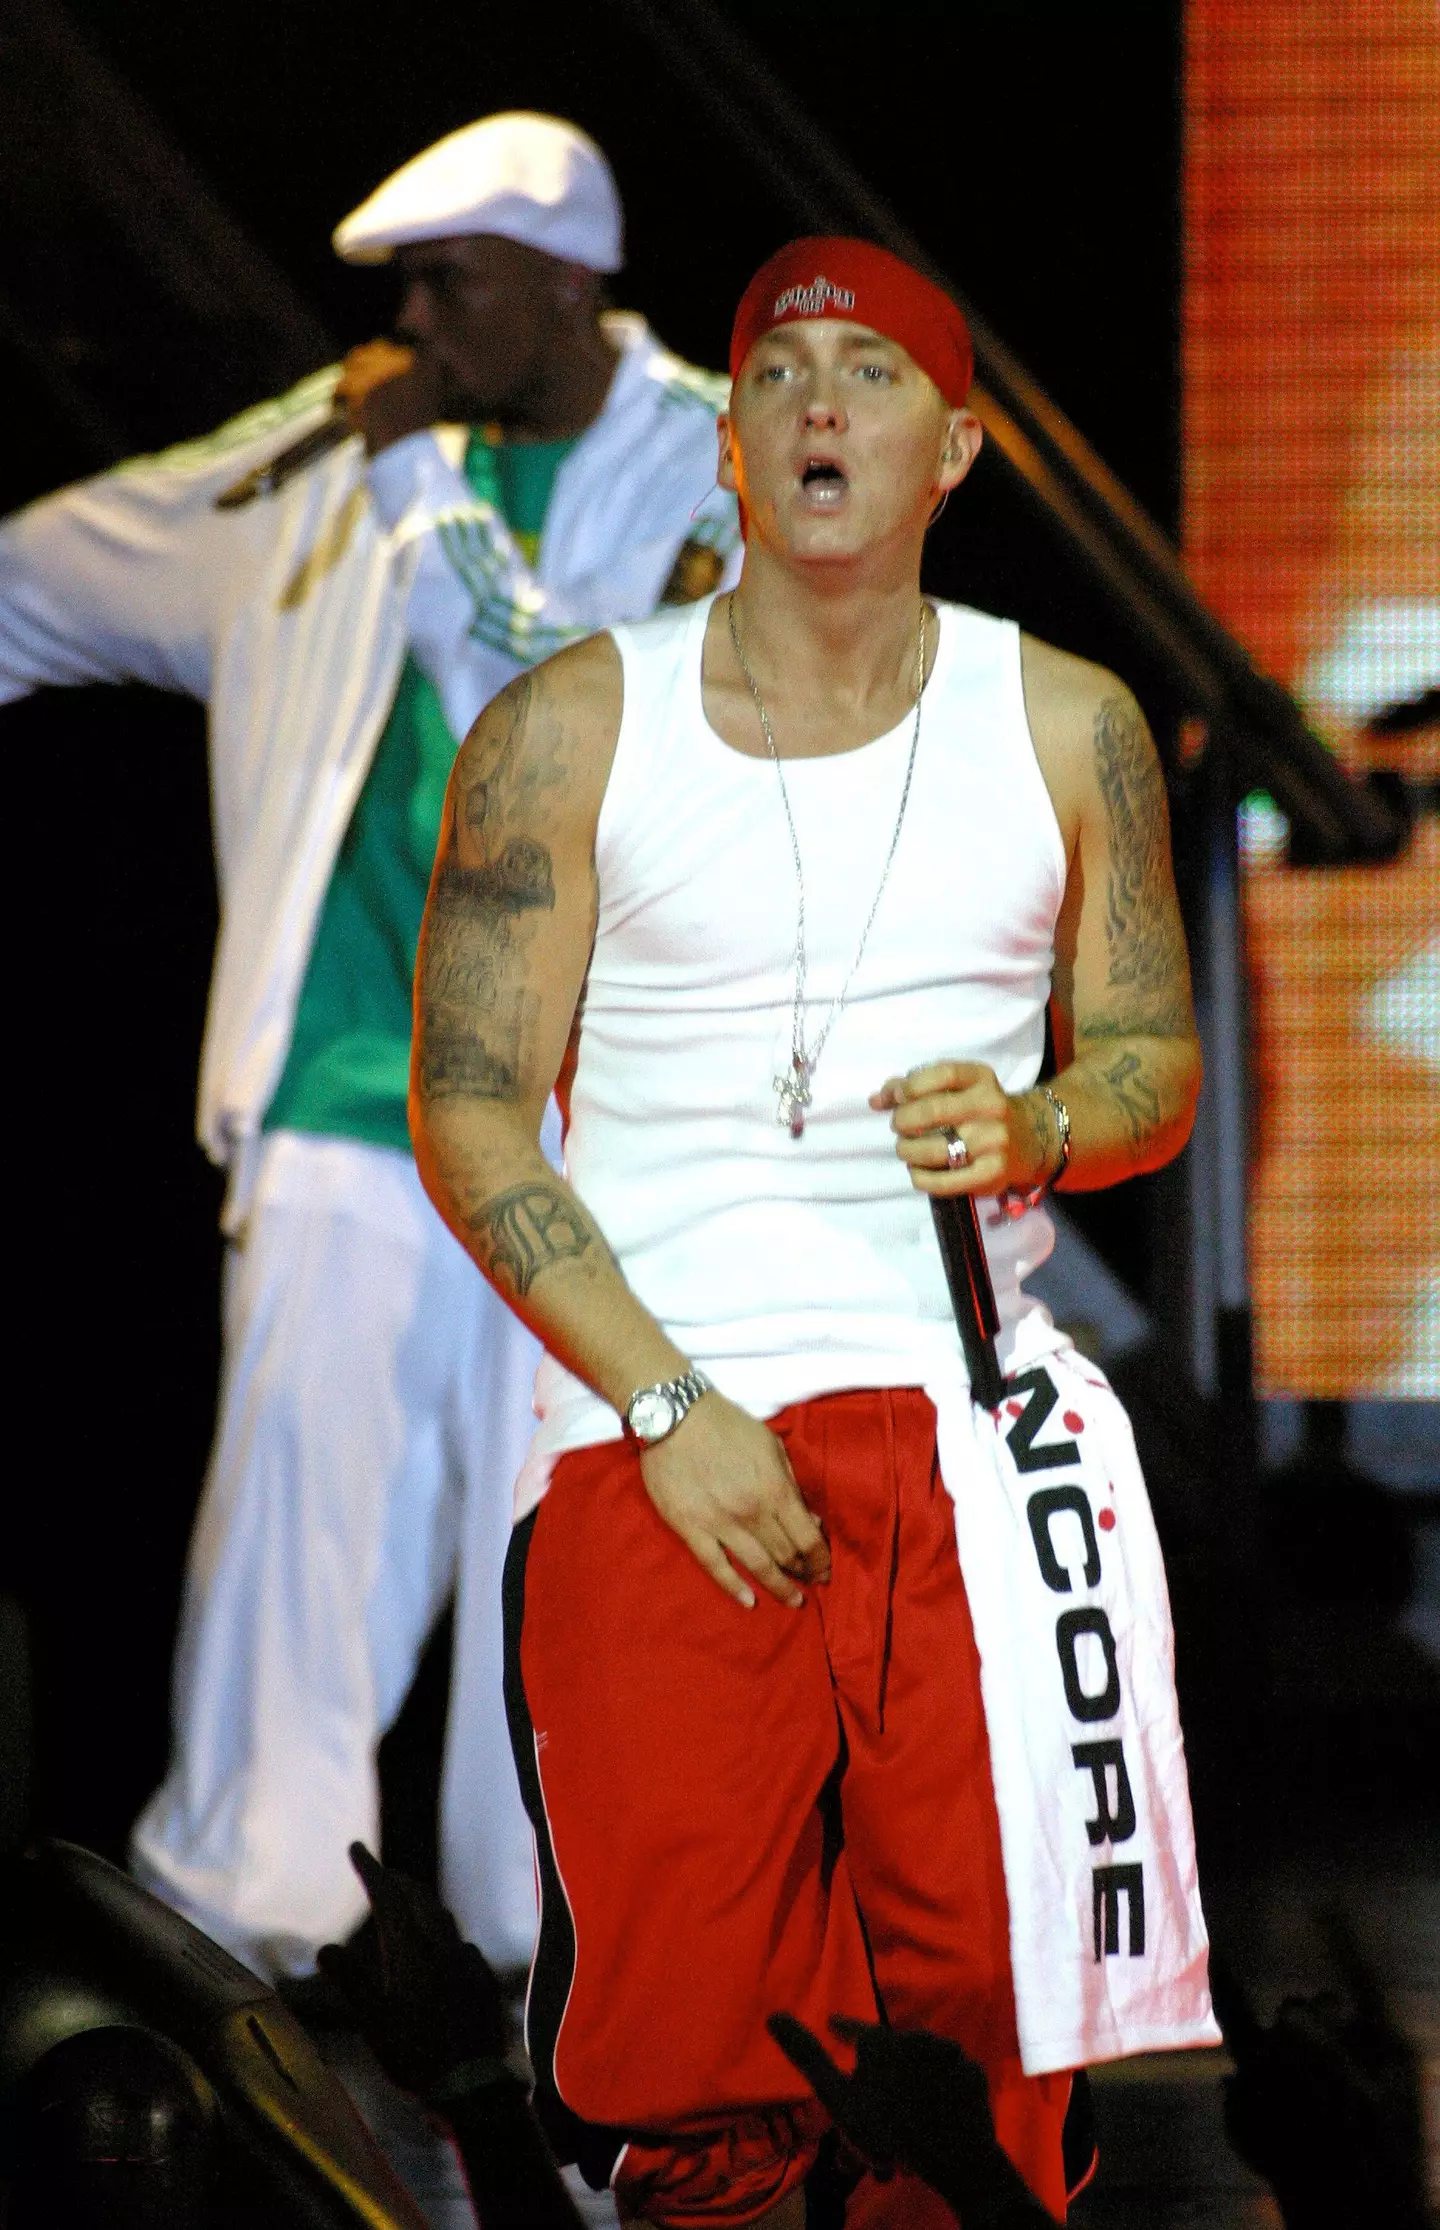 Eminem was number two - only tying with Brandon Flowers from The Killers.